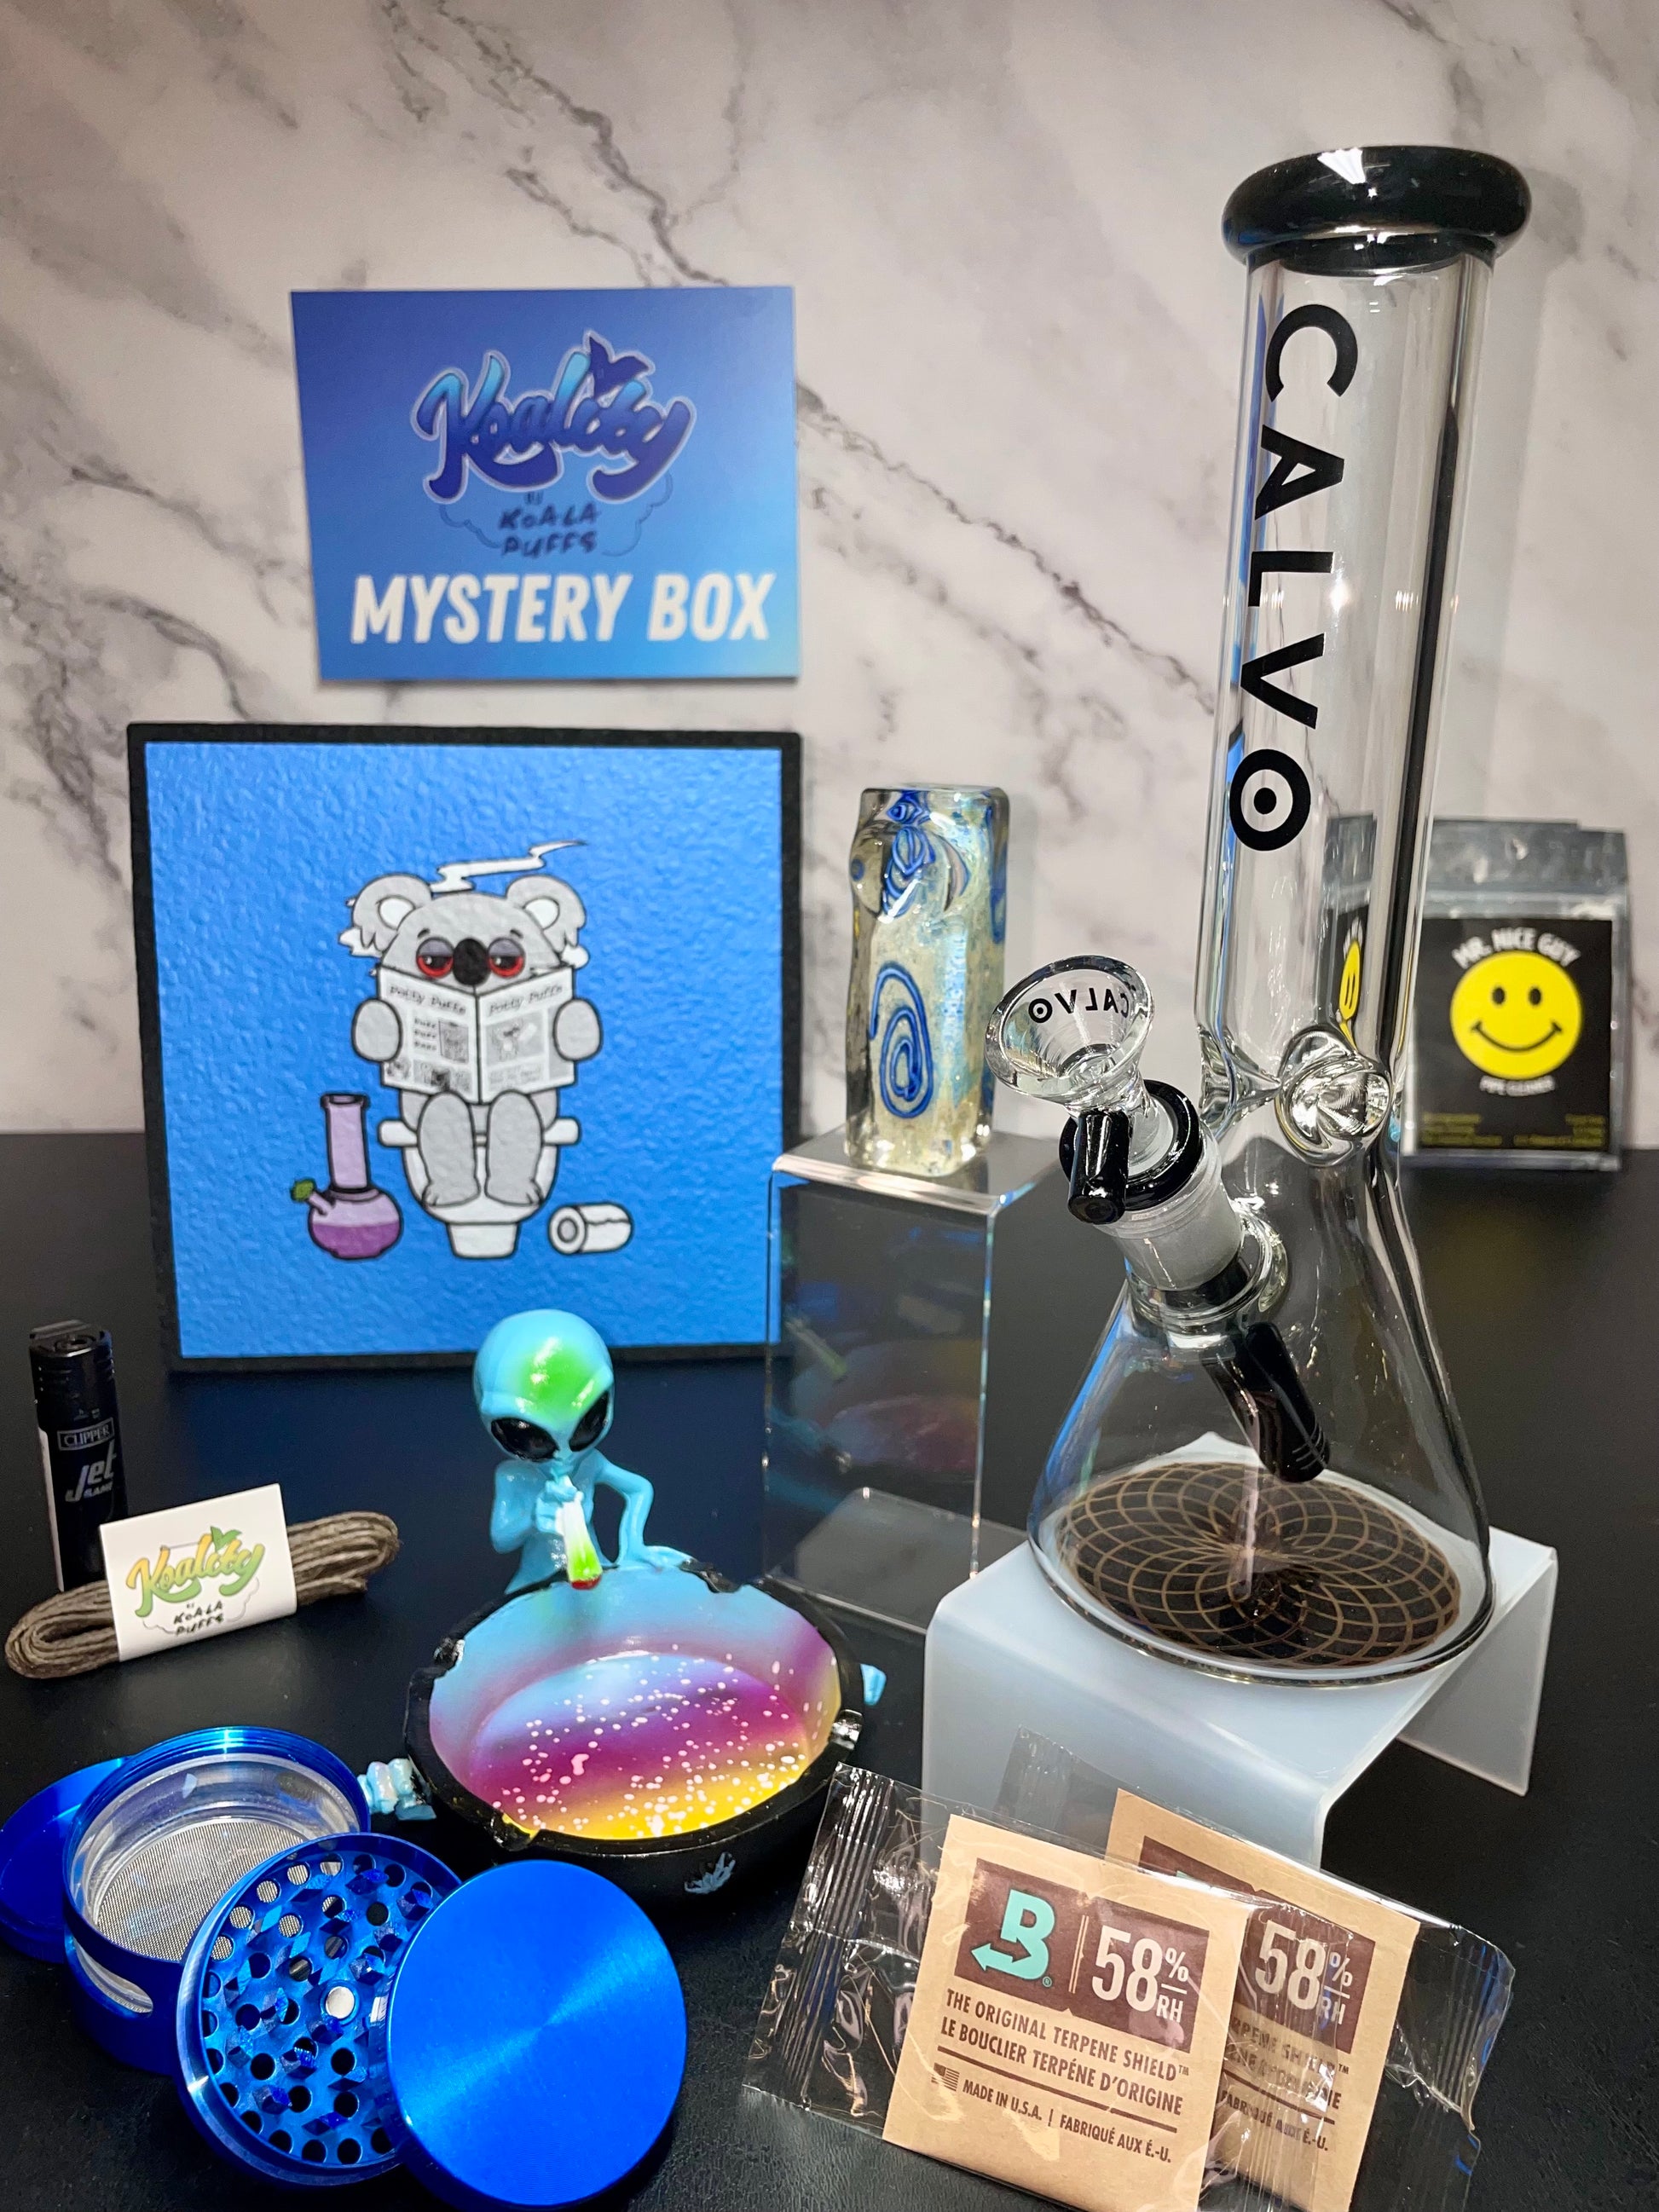 Mystery Box, Shop 420 Boxes, Weed Mystery Box